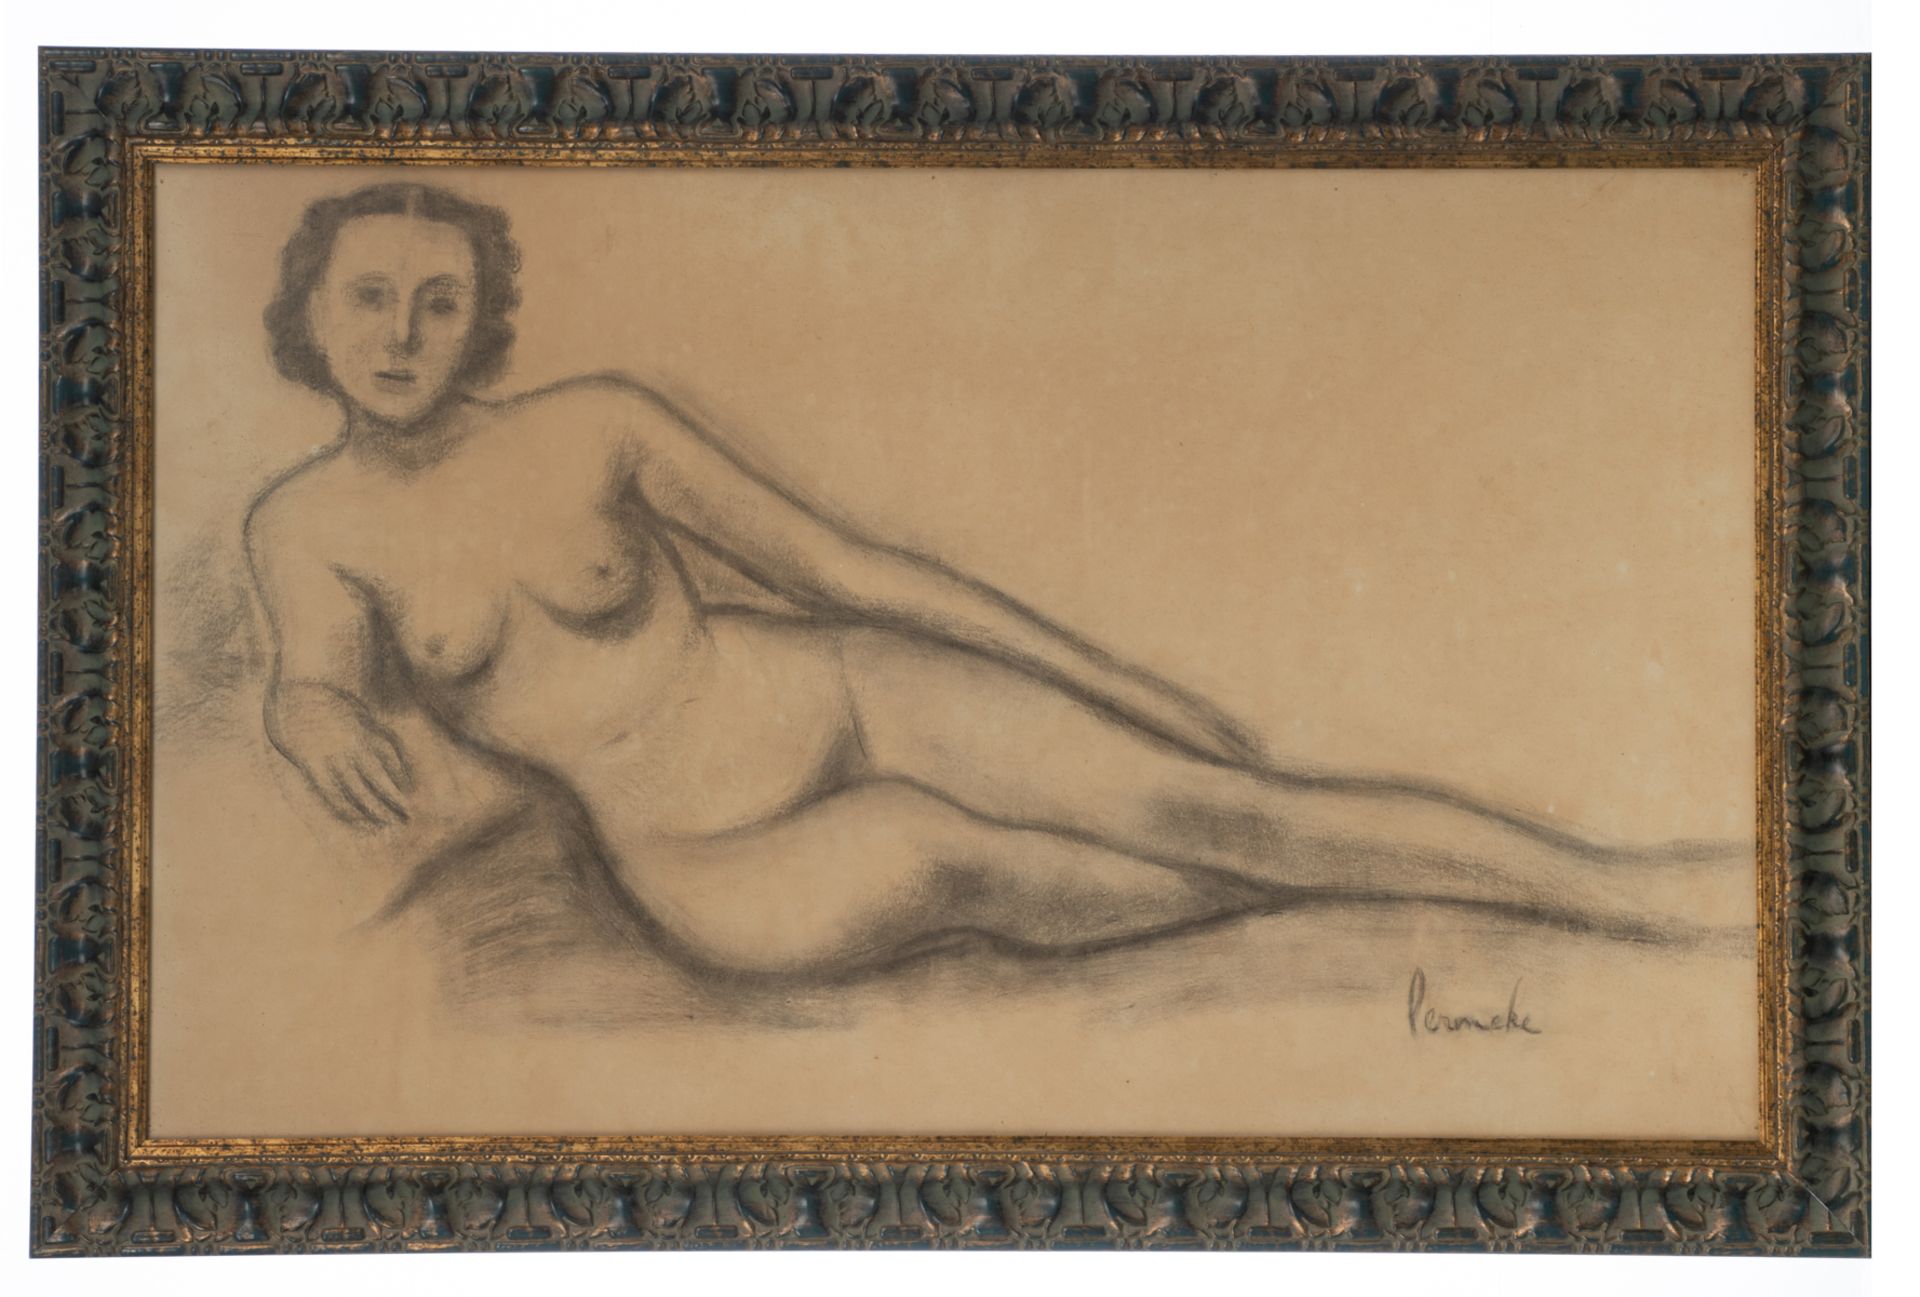 Permeke C., a lying female nude, charcoal on paper, 88 x 148 cm - Image 2 of 4